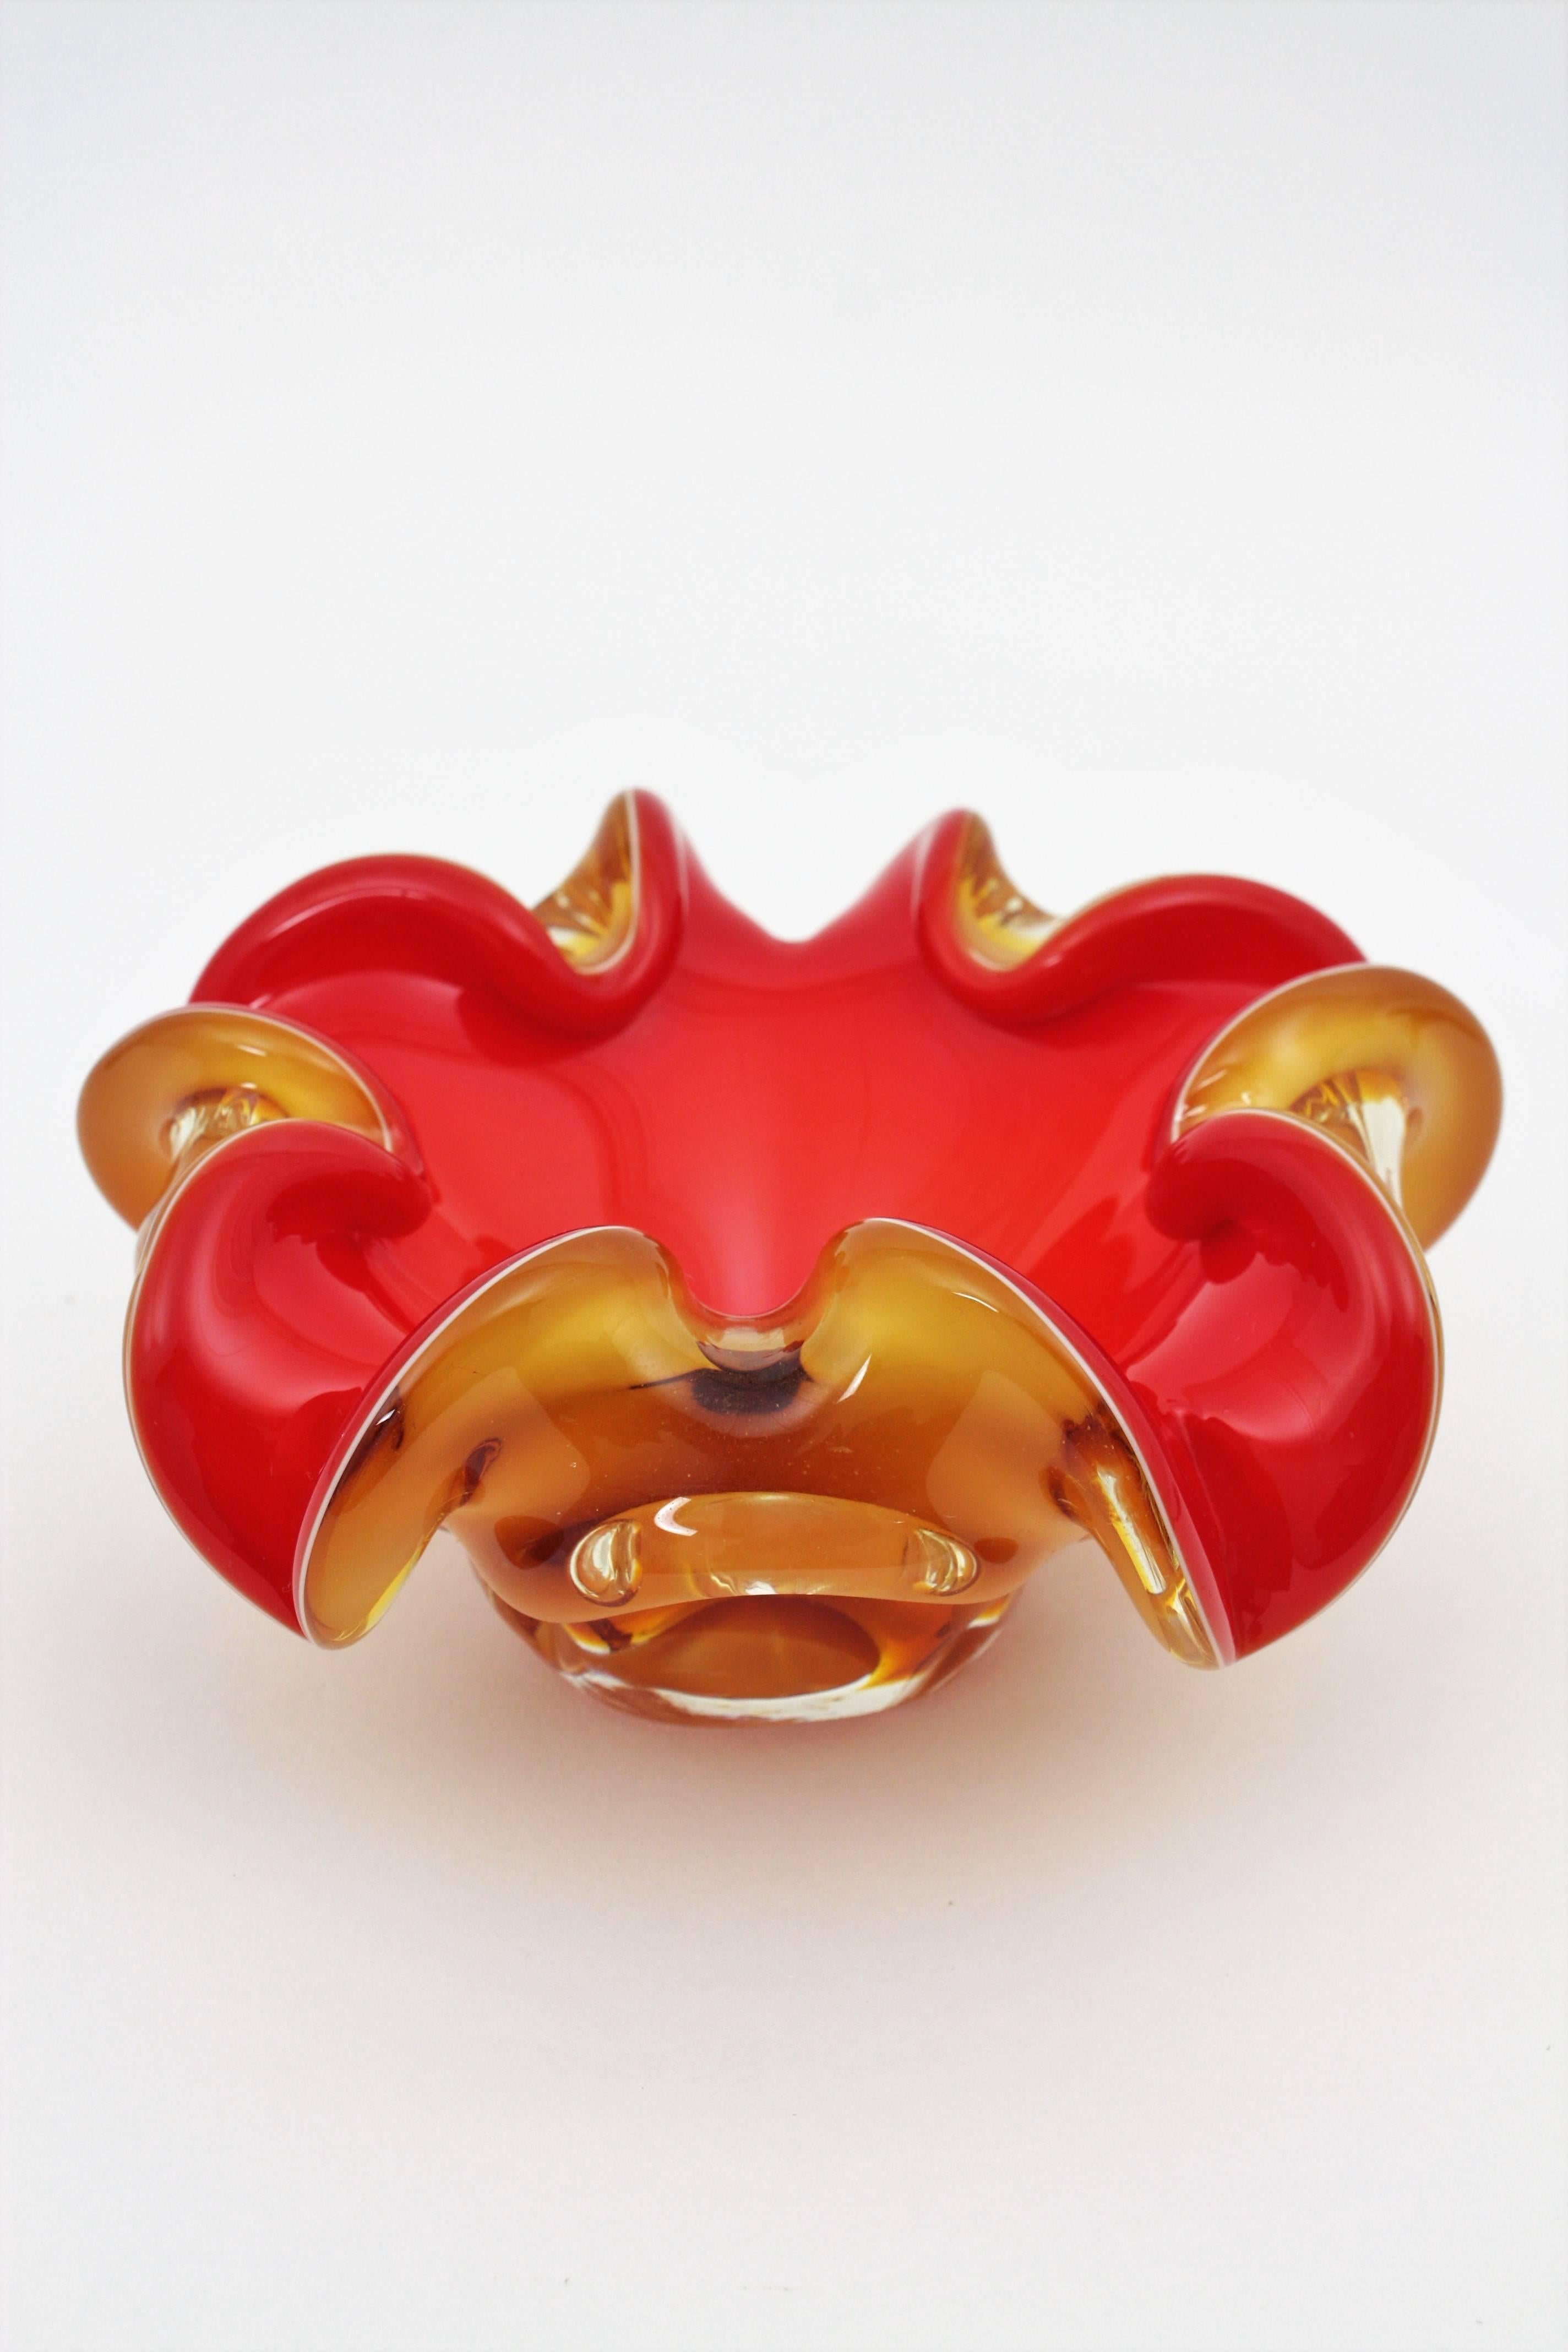 Mid-Century Modern Red and Amber Sommerso Murano Glass Art Flower Bowl